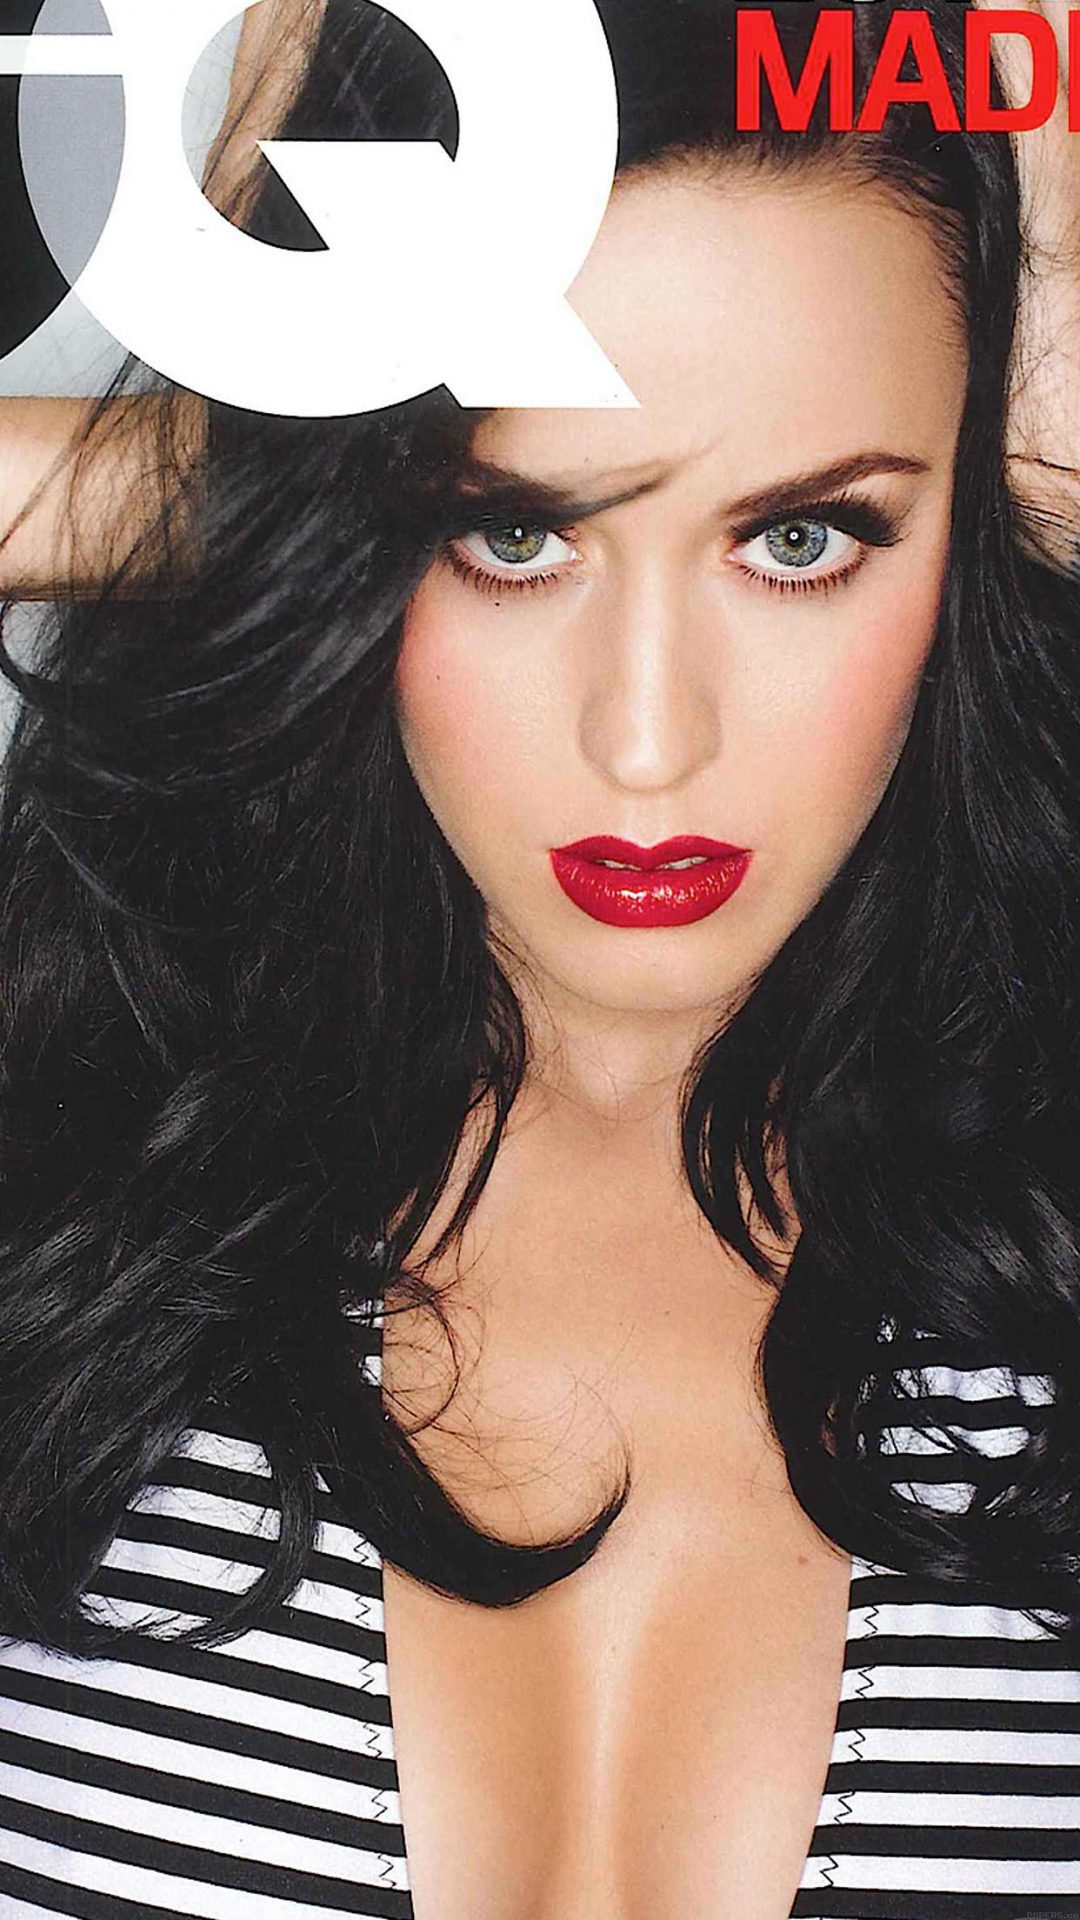 Wallpaper Gq Katy Perry Girl Music Face